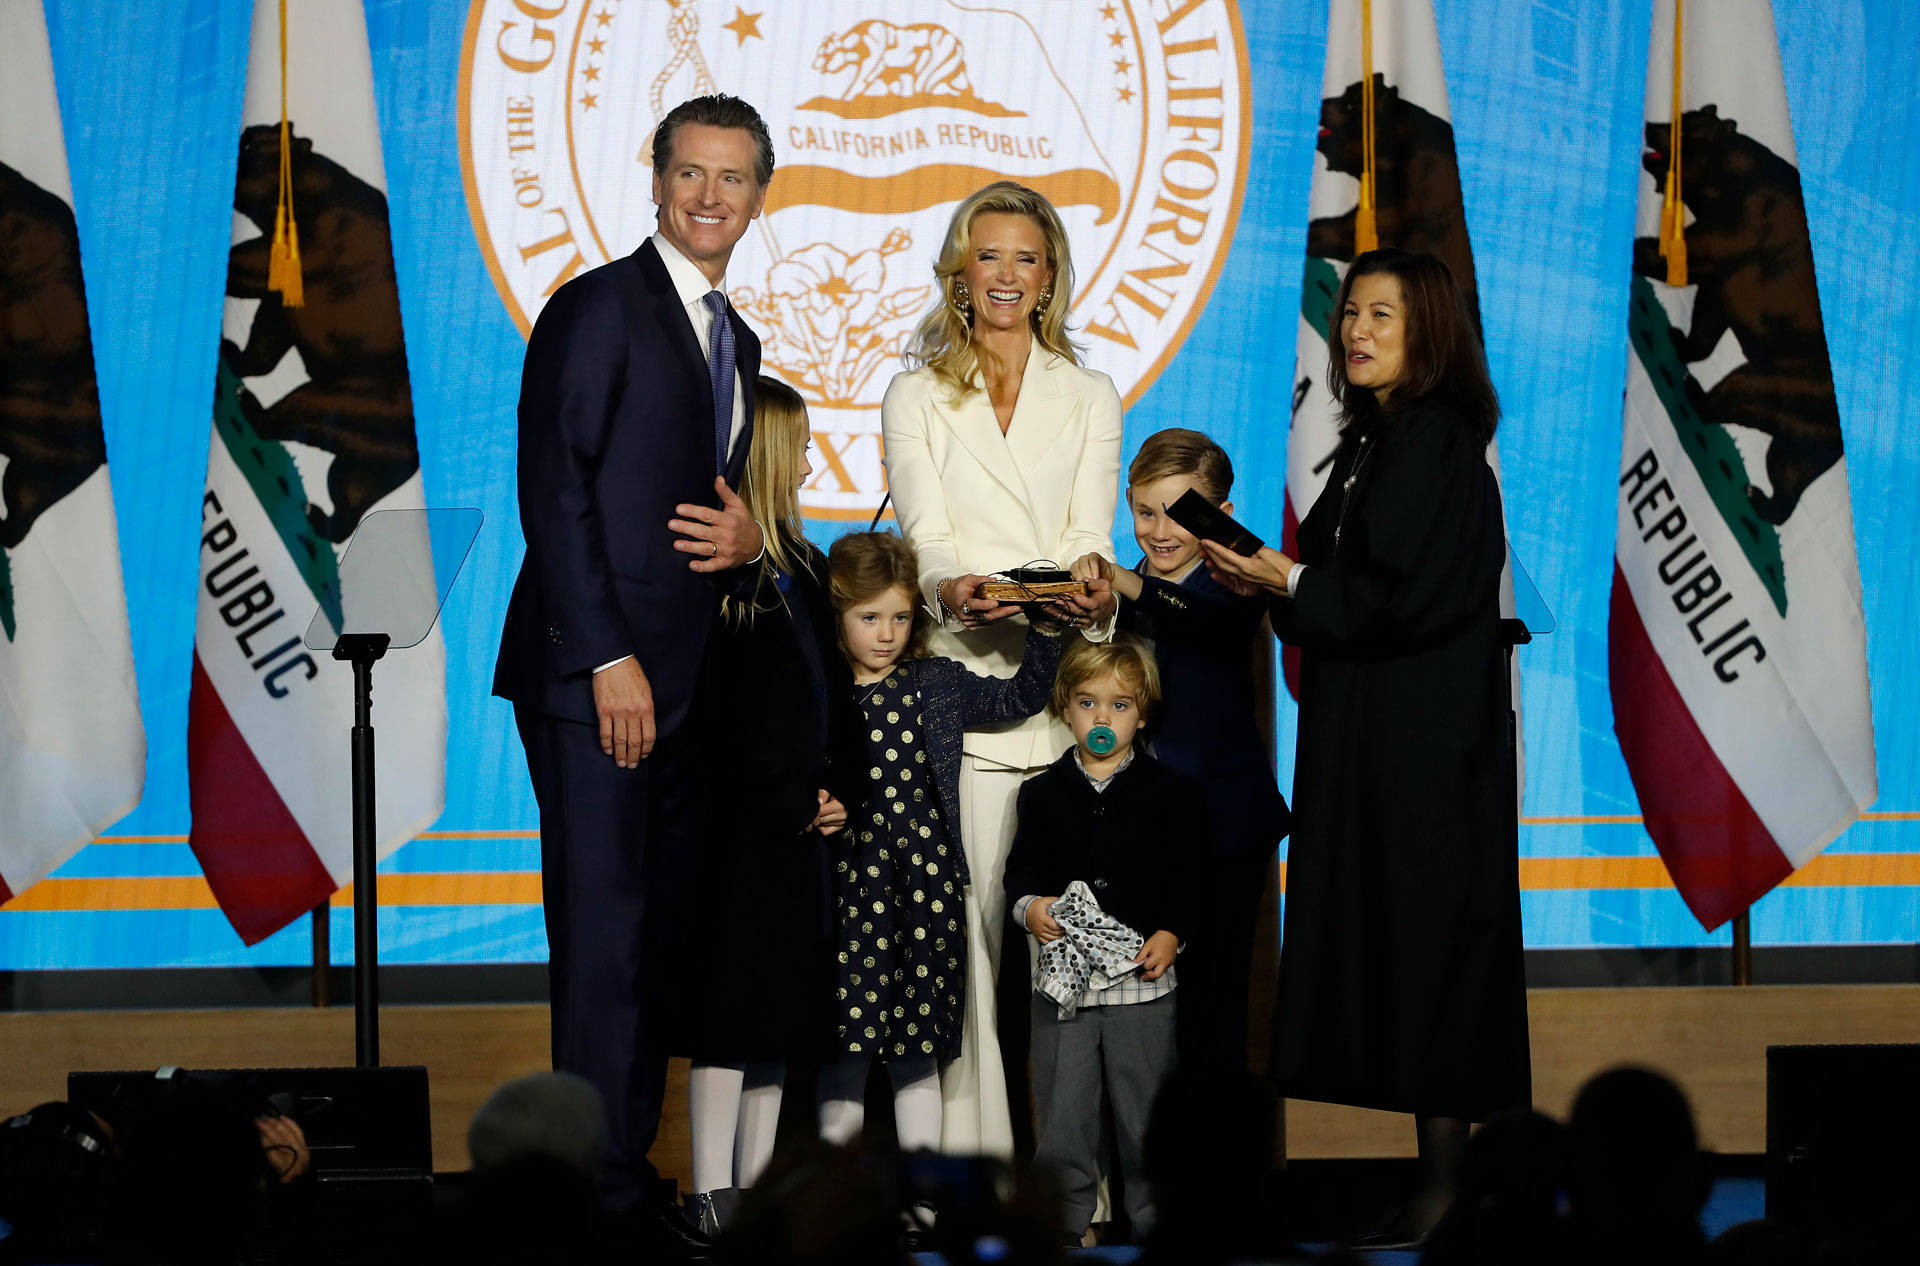 Gavin Newsom is sworn in as governor of California by California Chief Justice Tani Cantil-Sakauye (R), as Newsom's wife, Jennifer Siebel Newsom (C), watches on Jan. 7, 2019, in Sacramento. Stephen Lam/Getty Images